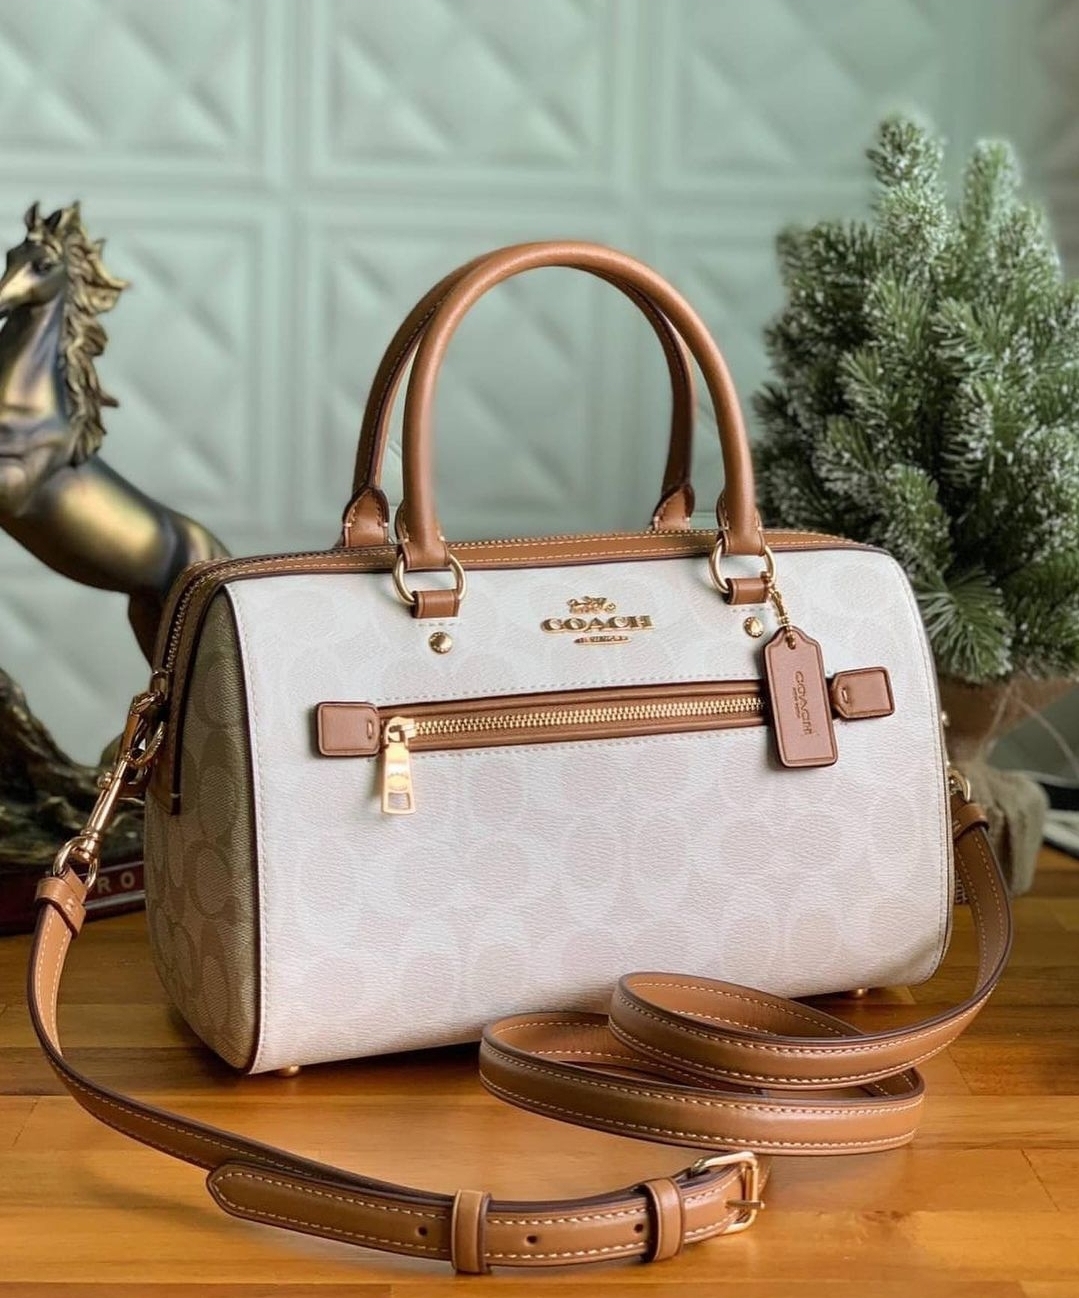 Coach Rowan Satchel in Blocked Signature Canvas in Chalk/Glacier White  Multi (CA149) RM800.00 Signature coated canvas and smooth leather Inside  zip and, By Usaloveshoppe